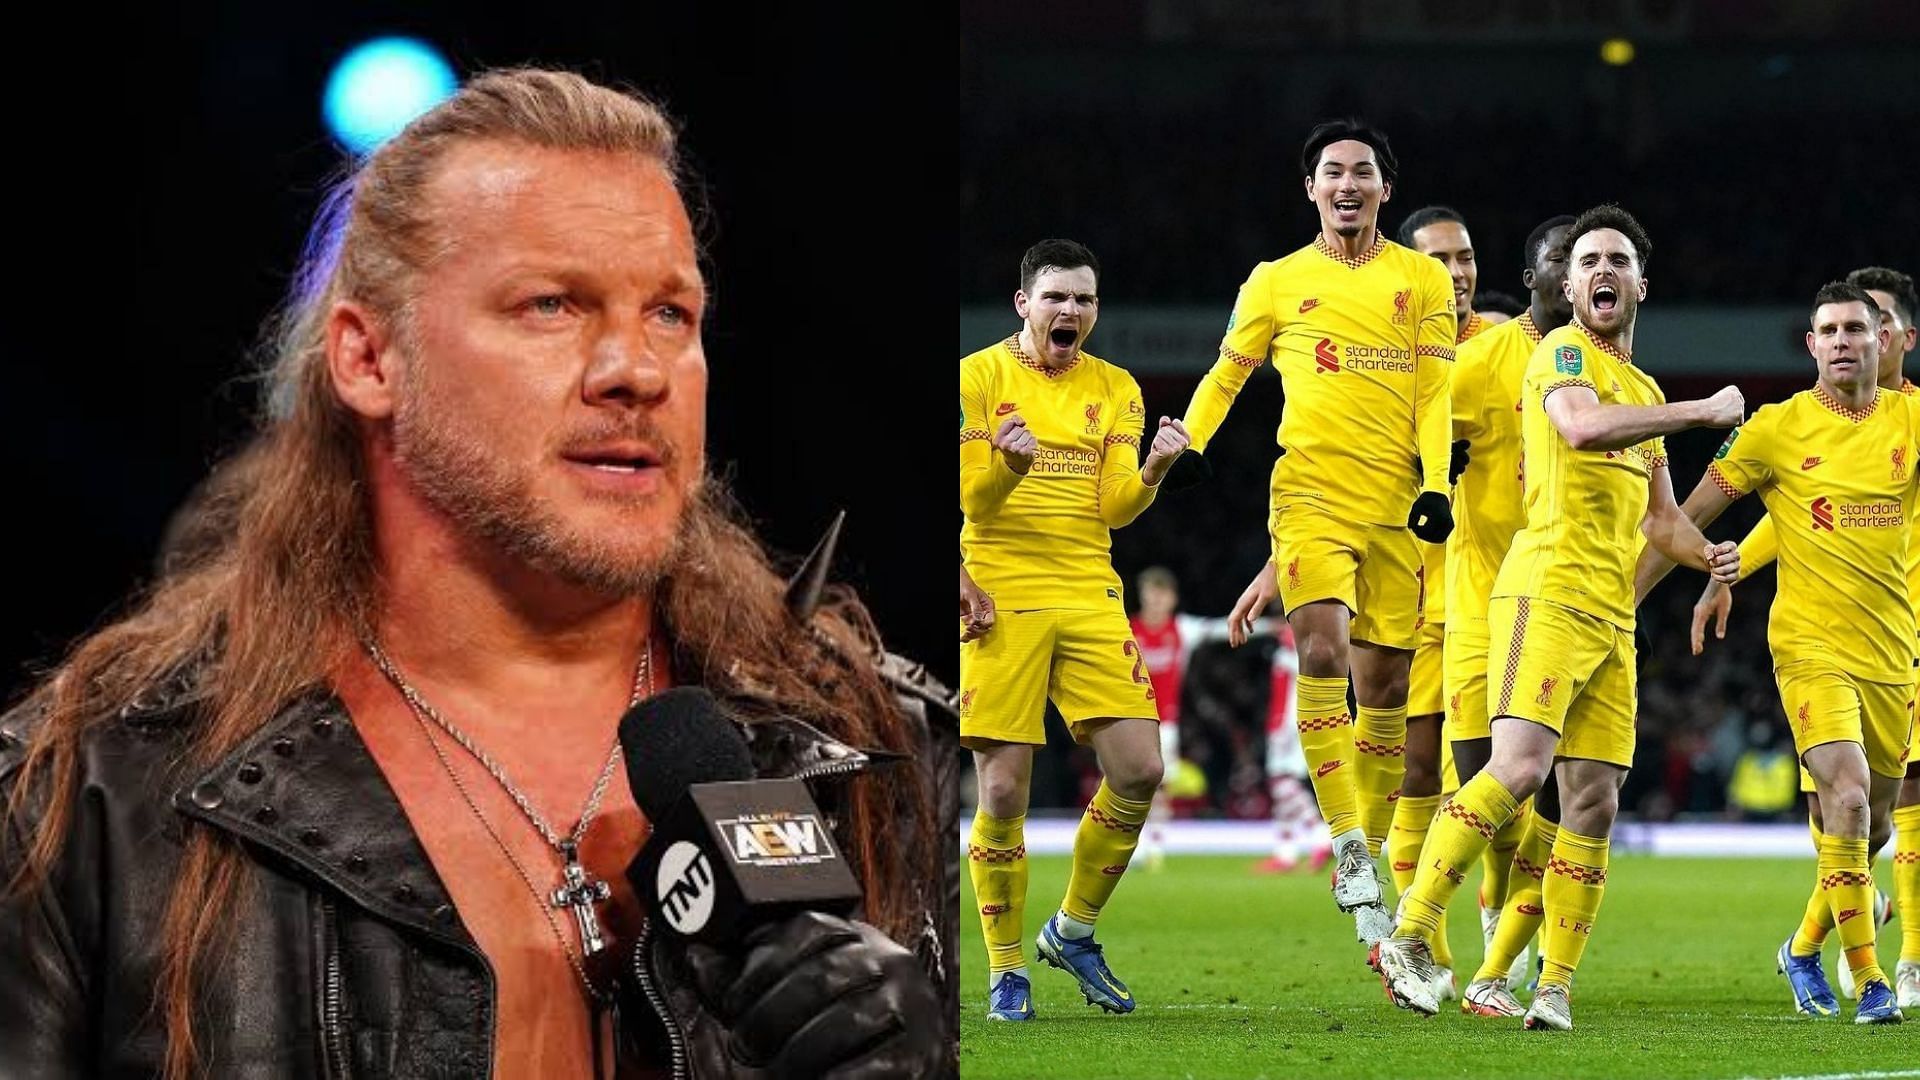 Chris Jericho had quite the reaction to Judas being played at the Emirates Stadium